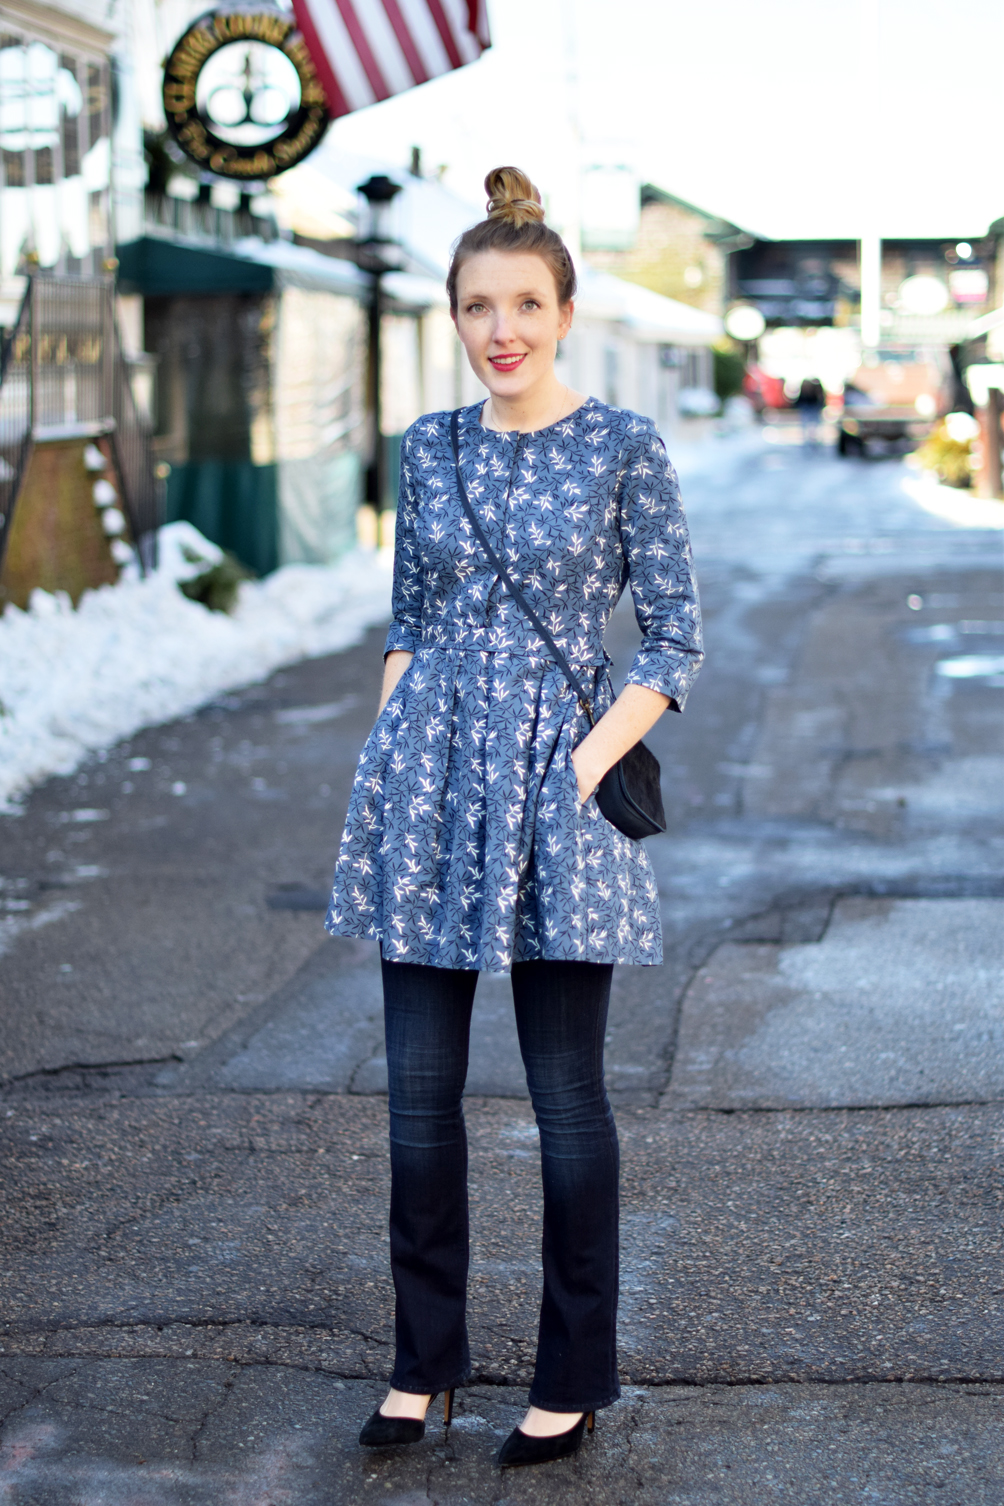 patterned flared dress over jeans winter outfit - one brass fox